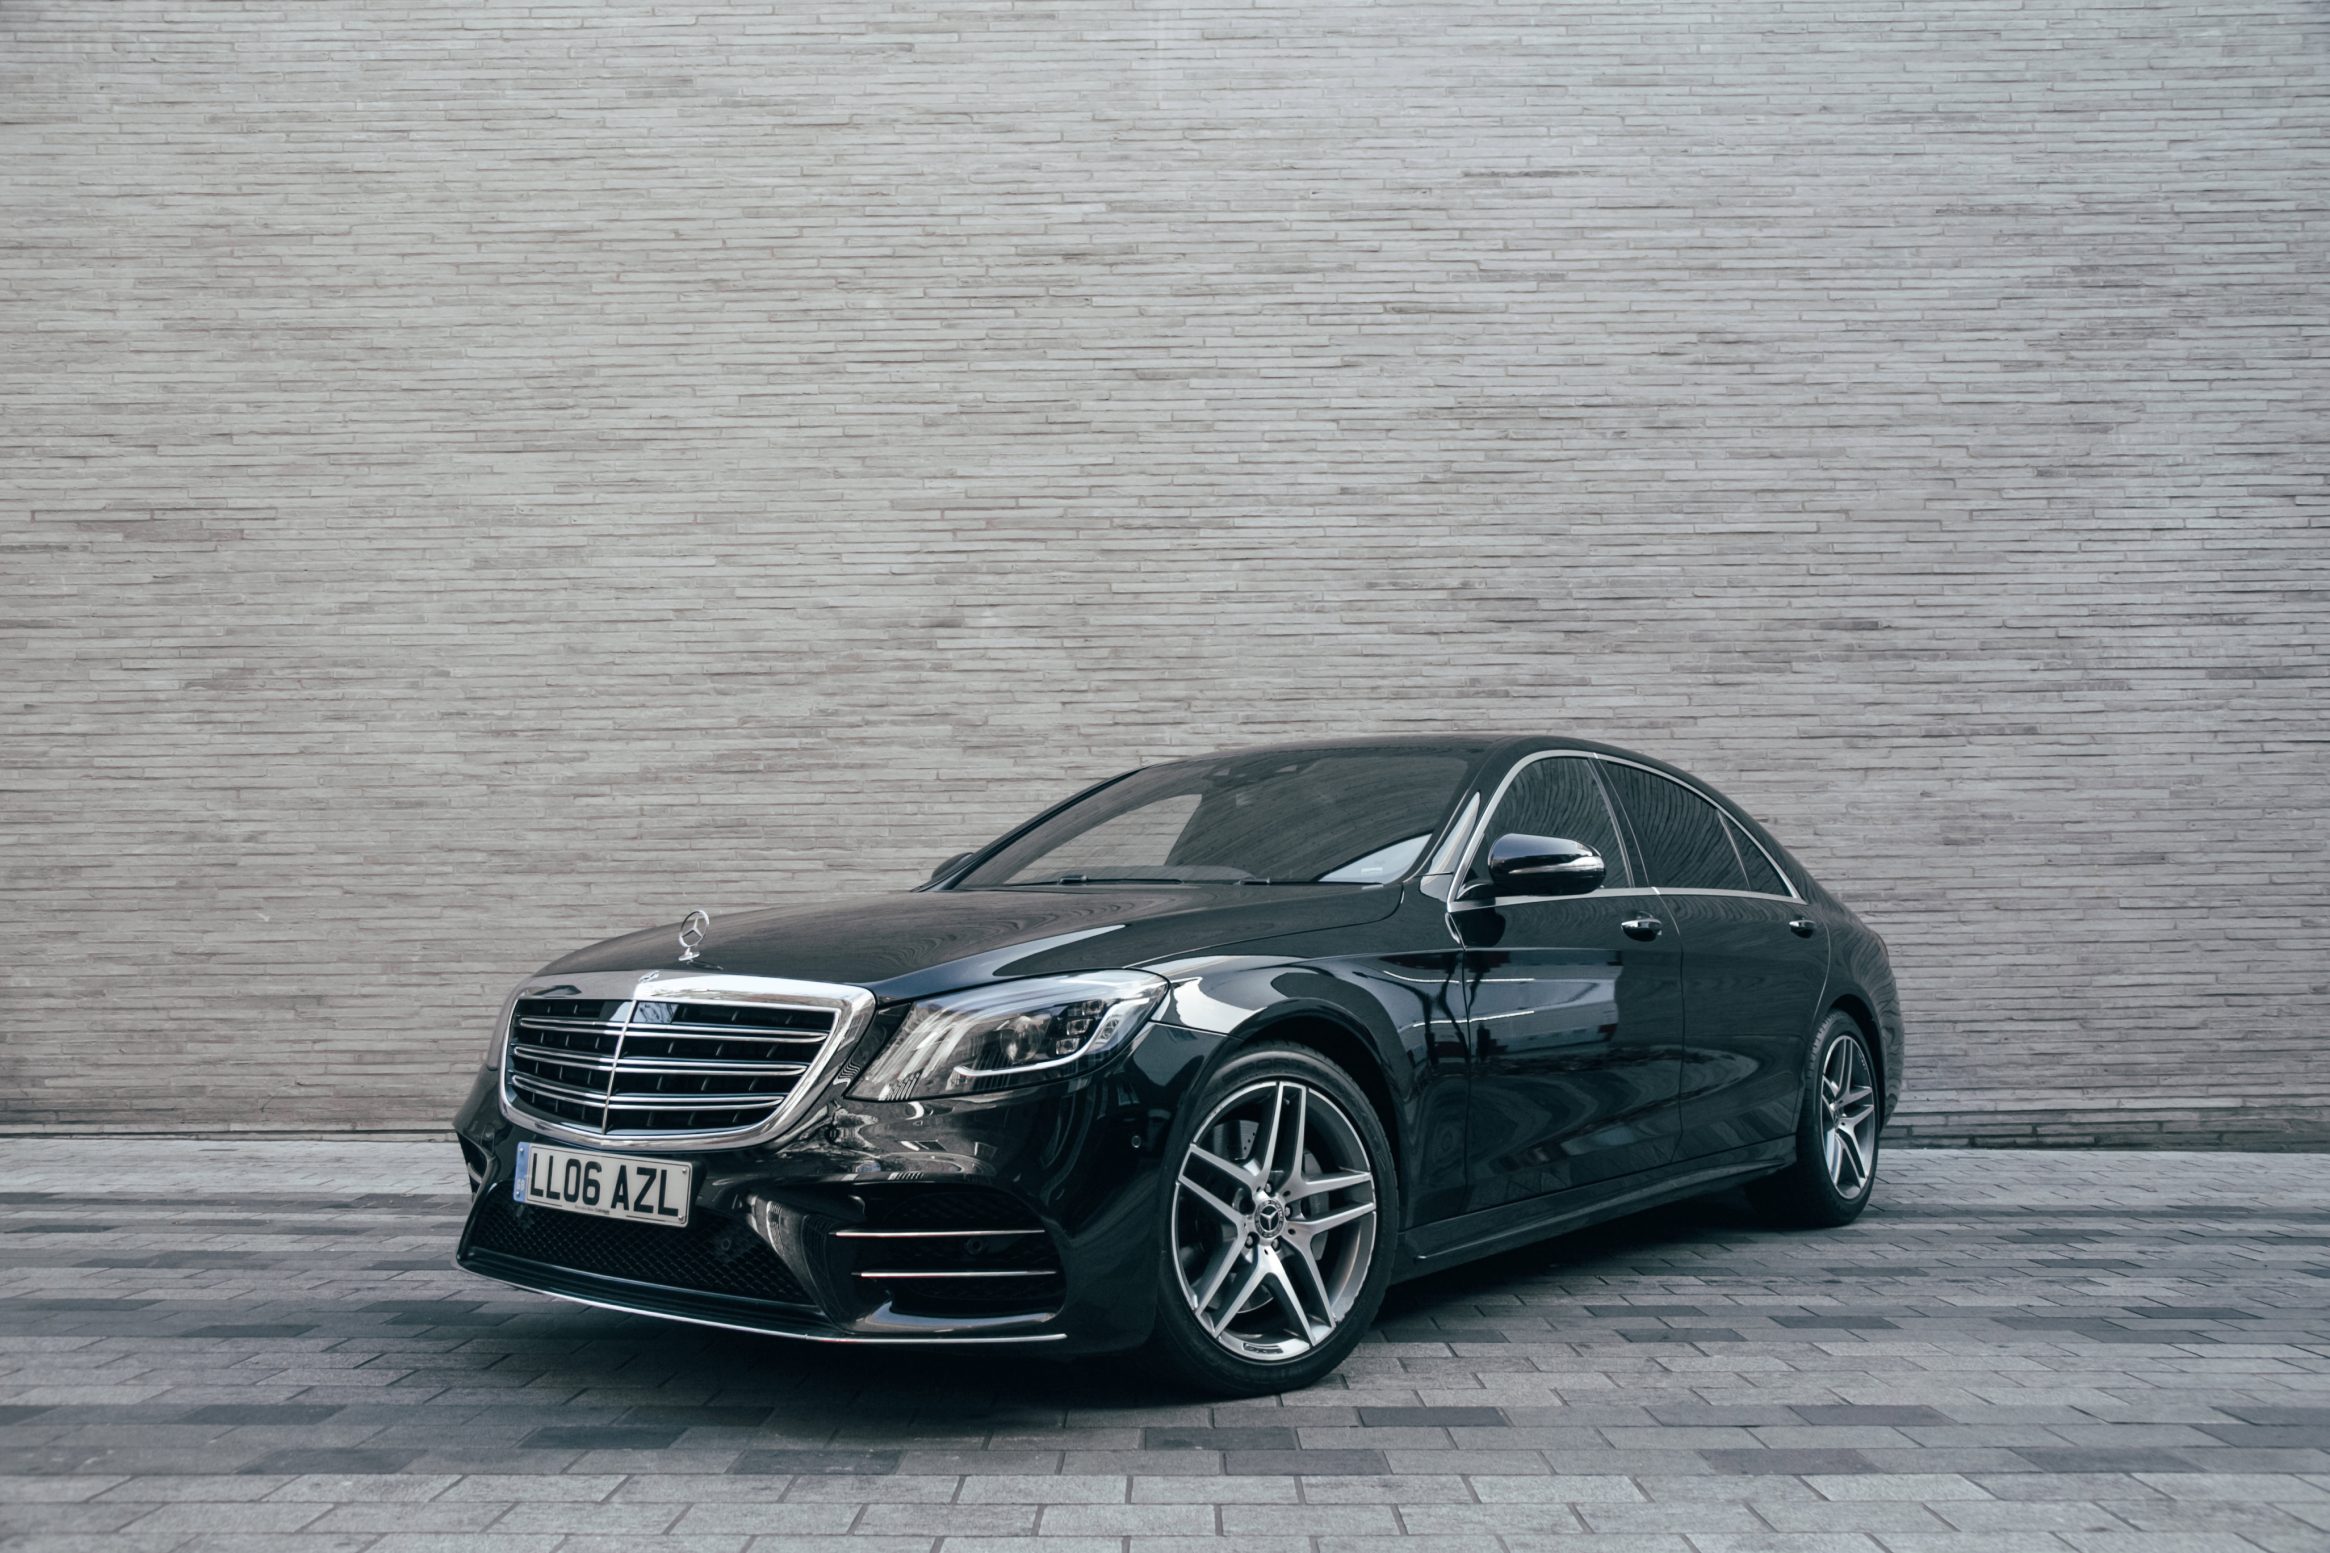 The Luxurious Mercedes-Benz S-Class available for hire at Azluxe Luxury Chauffeur Company, London.